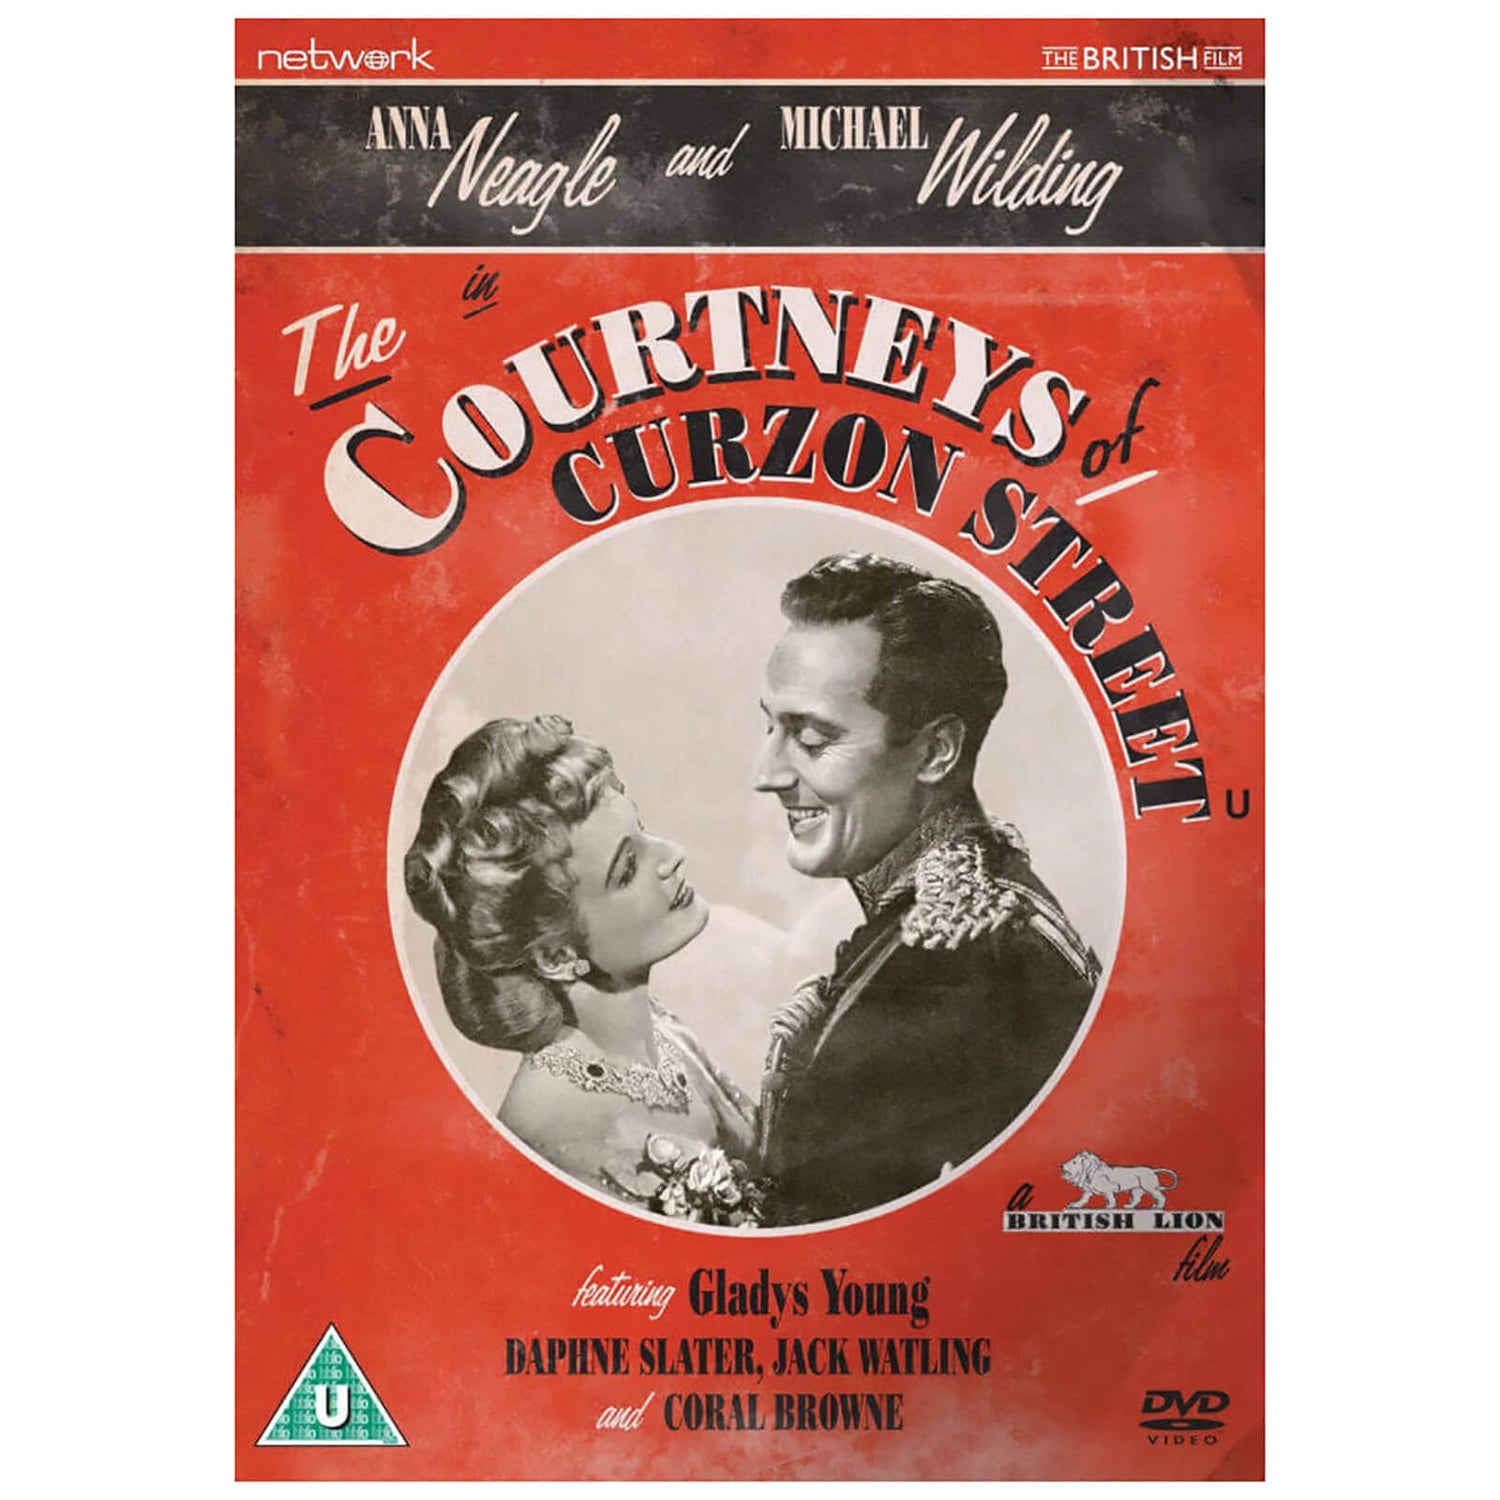 The Courtneys of Curzon Street